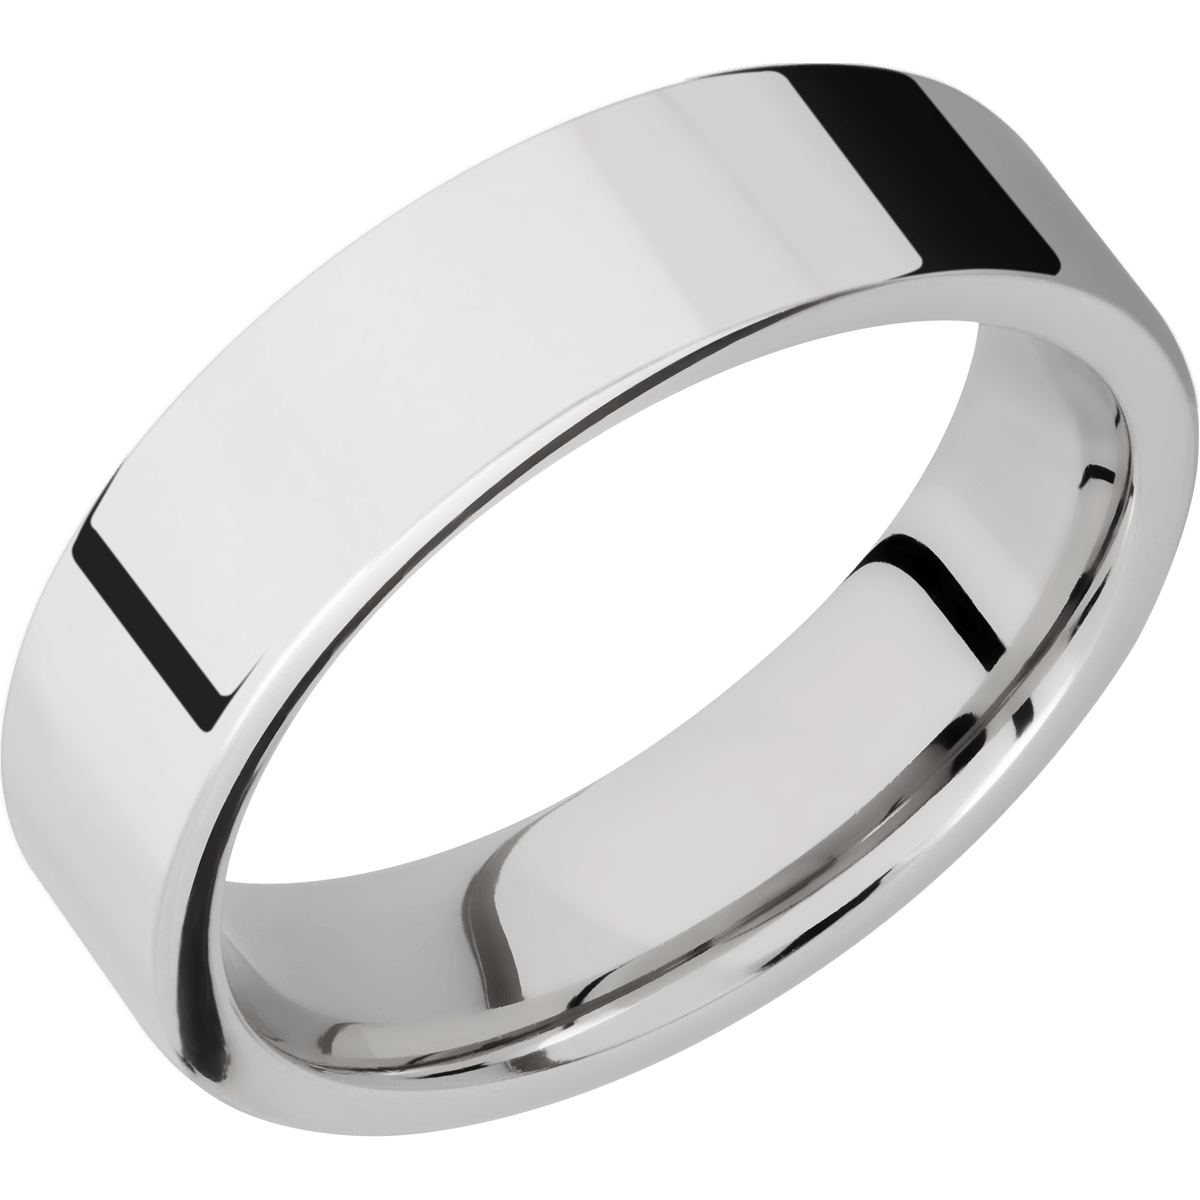 Comfort Flat Fit Men's Wedding Ring with a Polished Finish - Michael E. Minden Diamond Jewelers